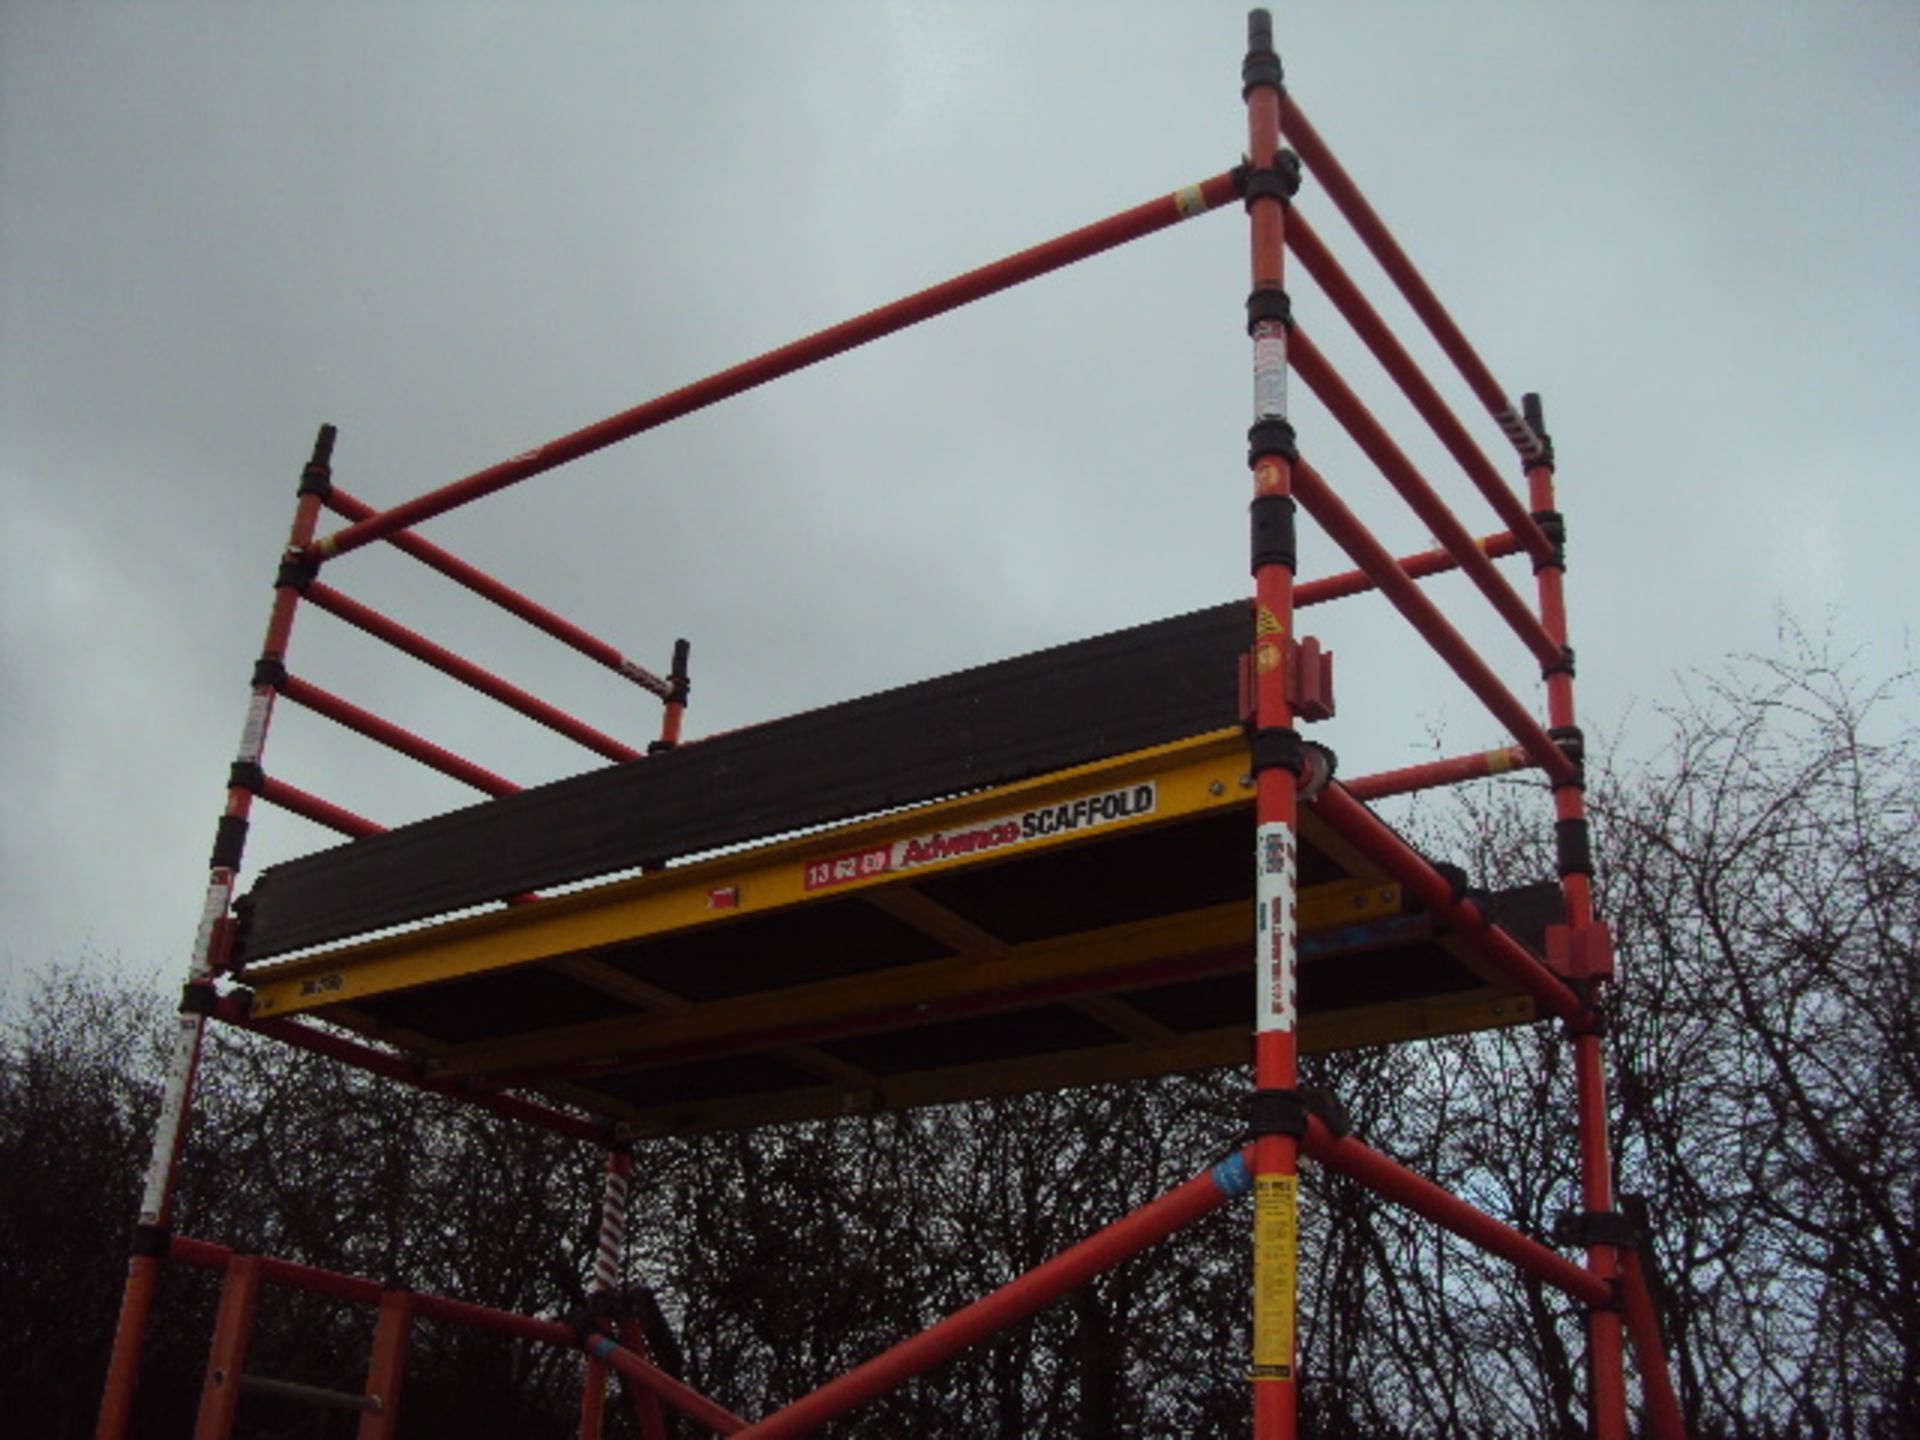 CLOW Advanced Scaffold 4.5m mobile fibreglass scaffold tower. Comprising uprights, bracing bars, - Image 3 of 3